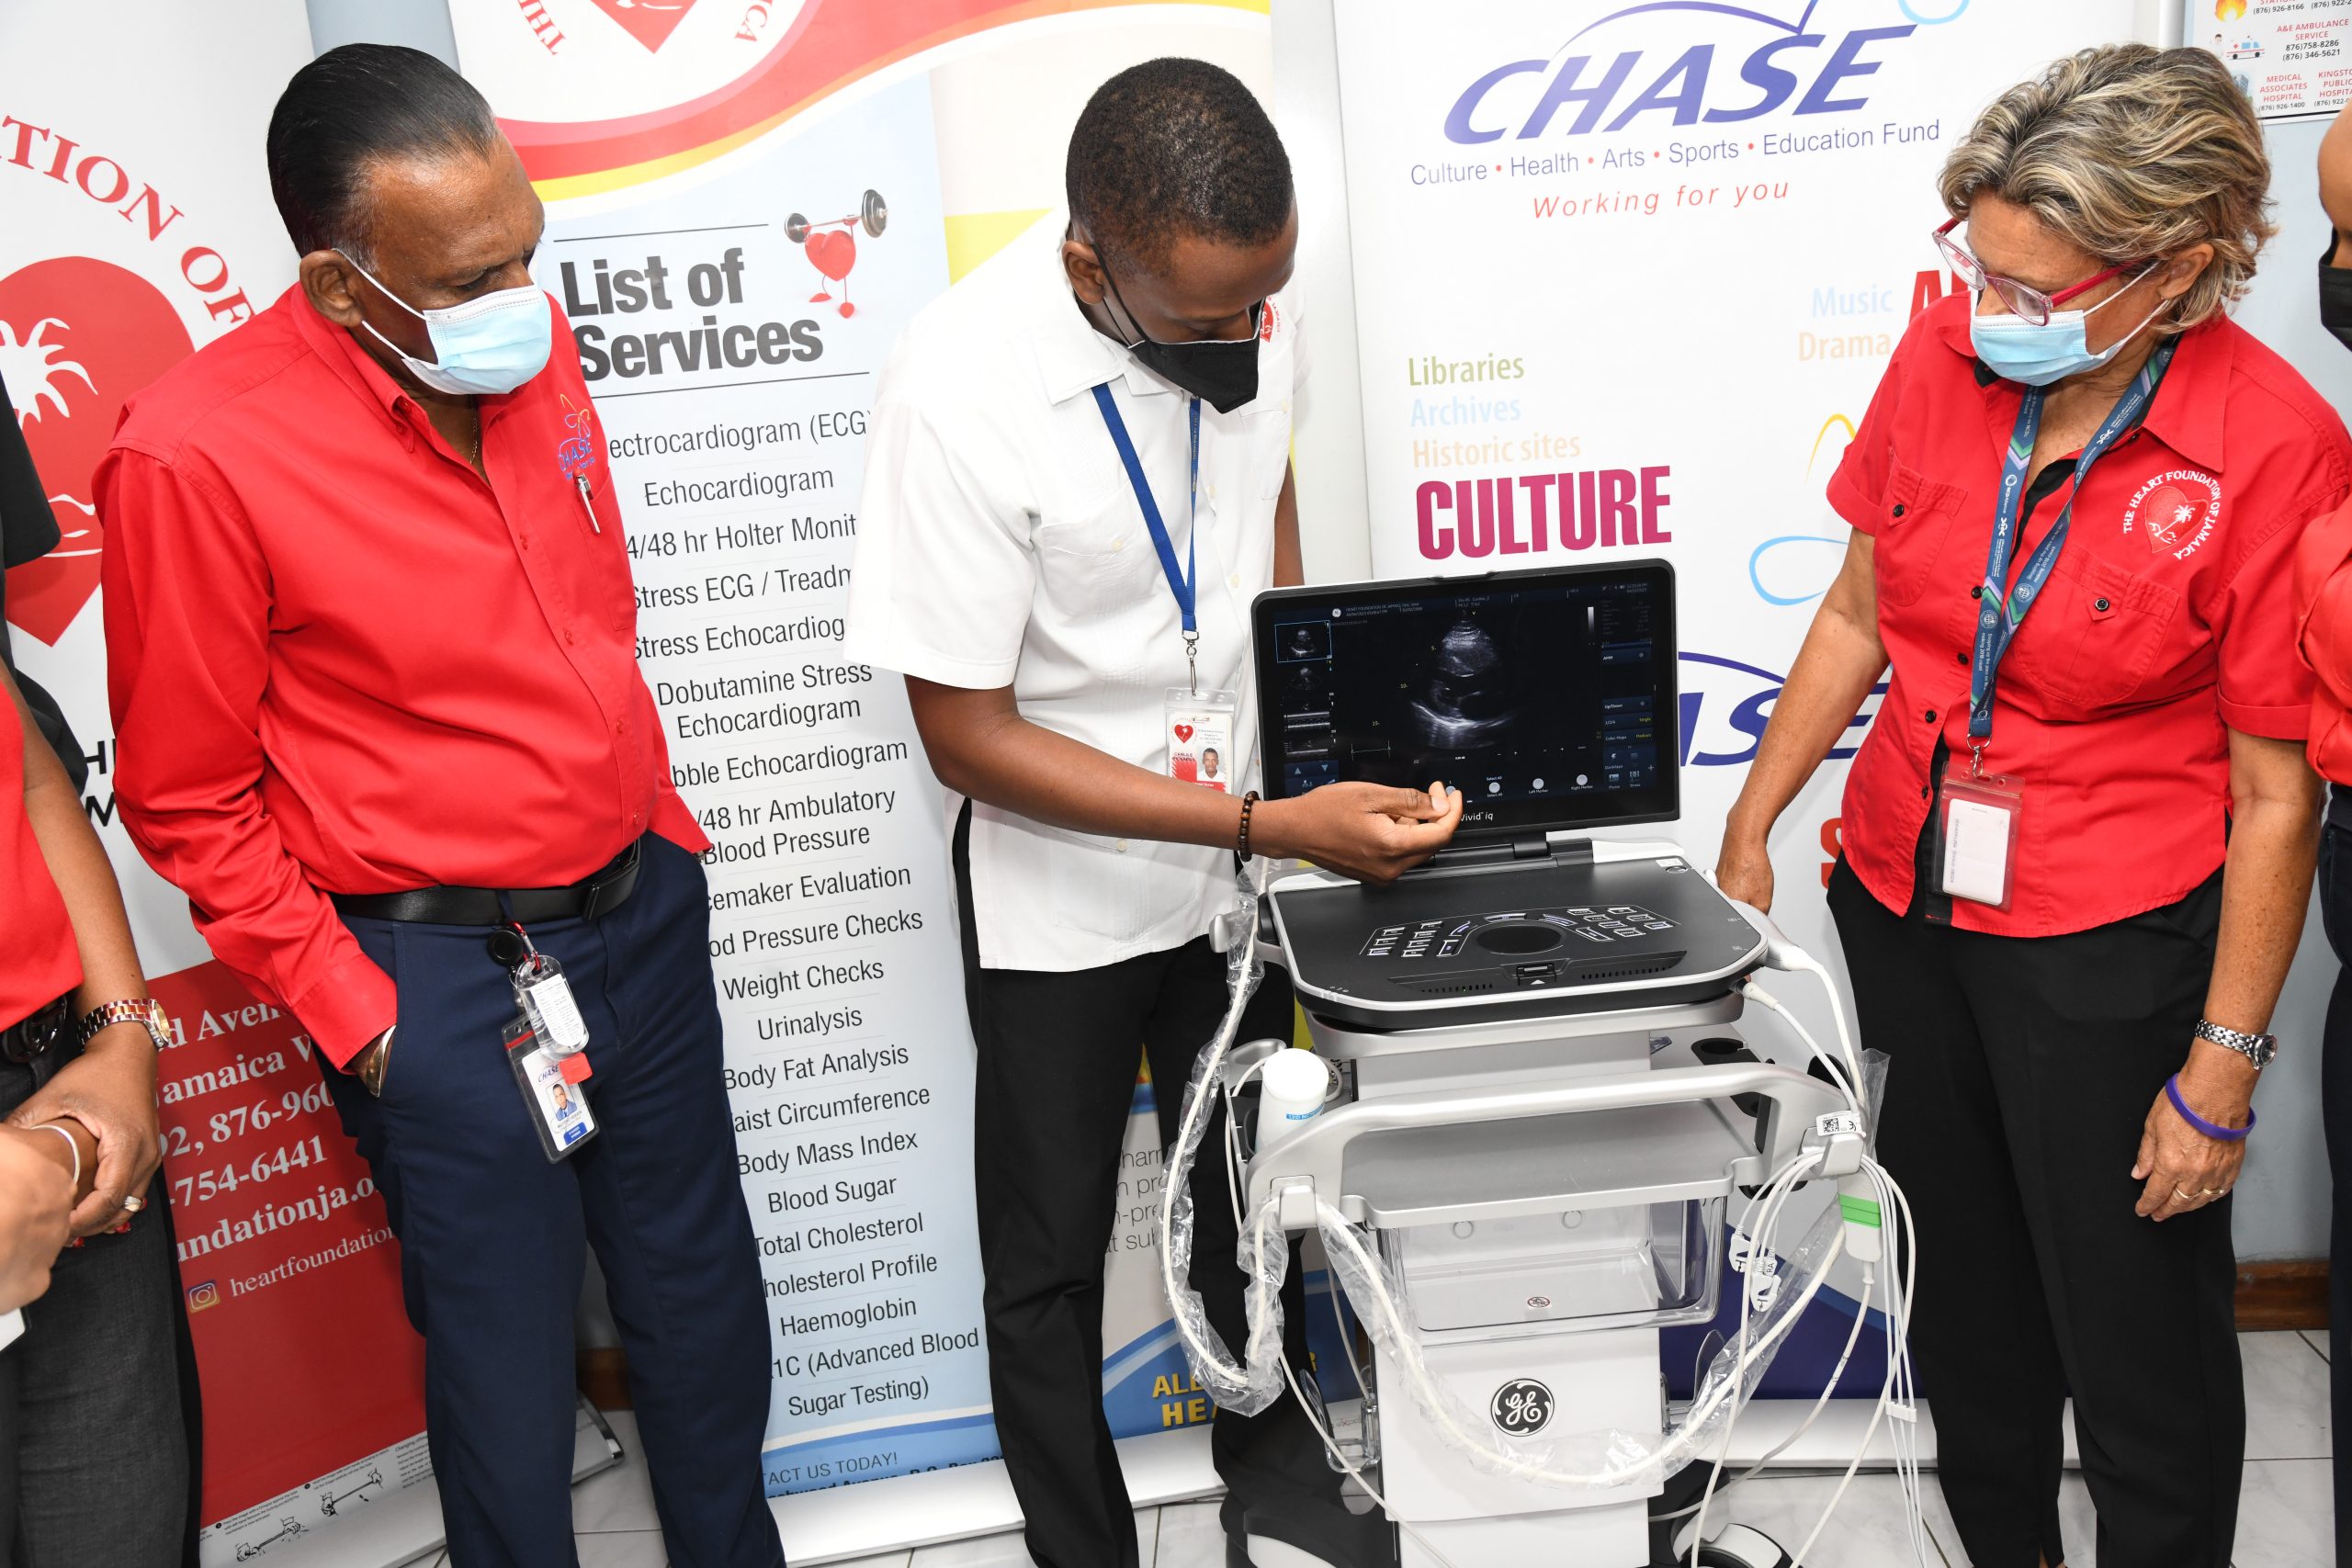 Mr. Carlisle Richardson, Cardiovascular Technician, HFJ, highlights features of the echocardiogram machine to CEO of the Culture, Health, Arts, Sports and Education (CHASE) Fund, Wilford 'Billy' Heaven and Executive Director of the Heart Foundation of Jamaica (HFJ), Deborah Chen. The ECG machine valued at $9 million was donated to the HFJ by the CHASE Fund.